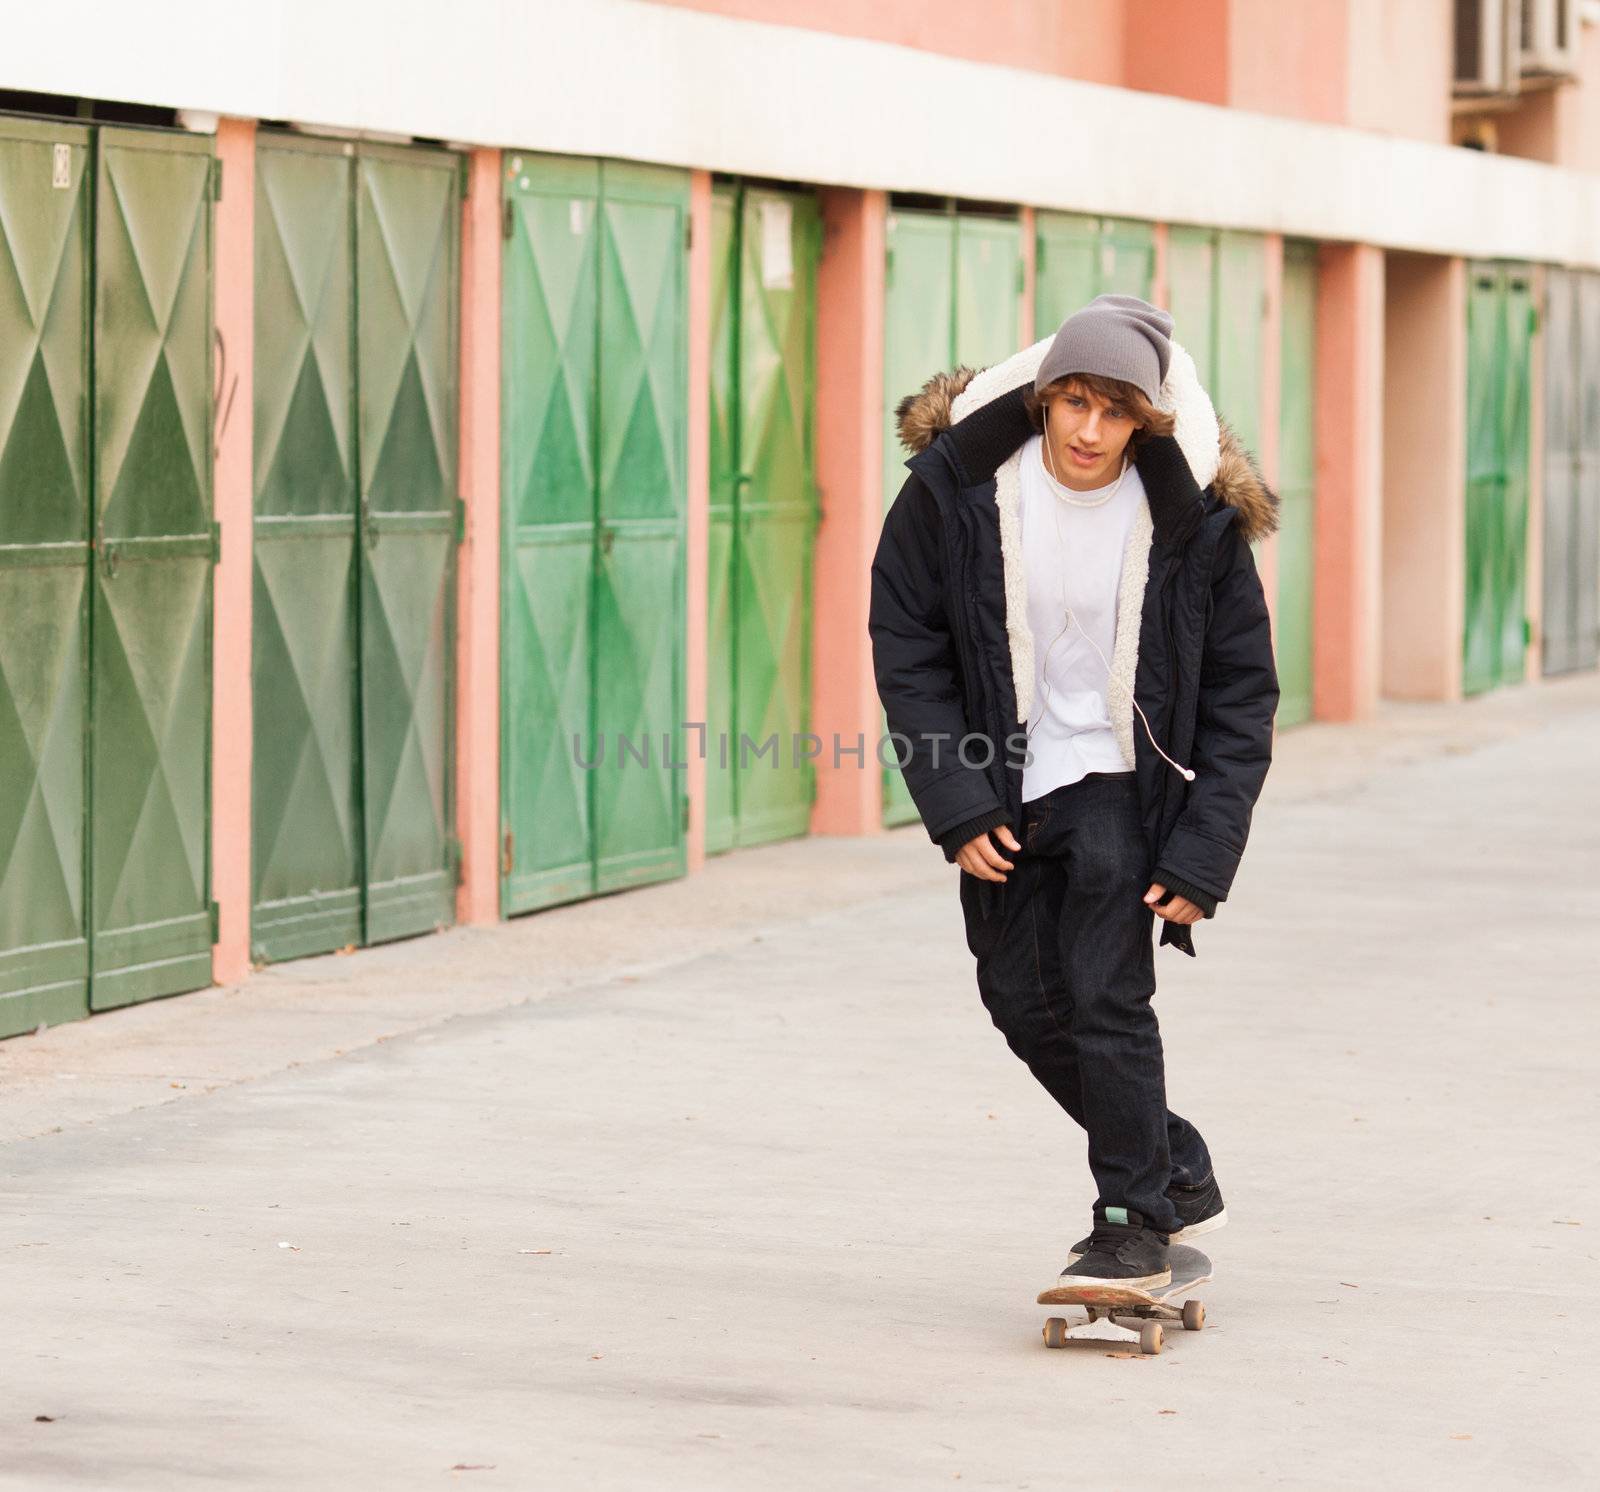 young skater rolling down the street by Lcrespi